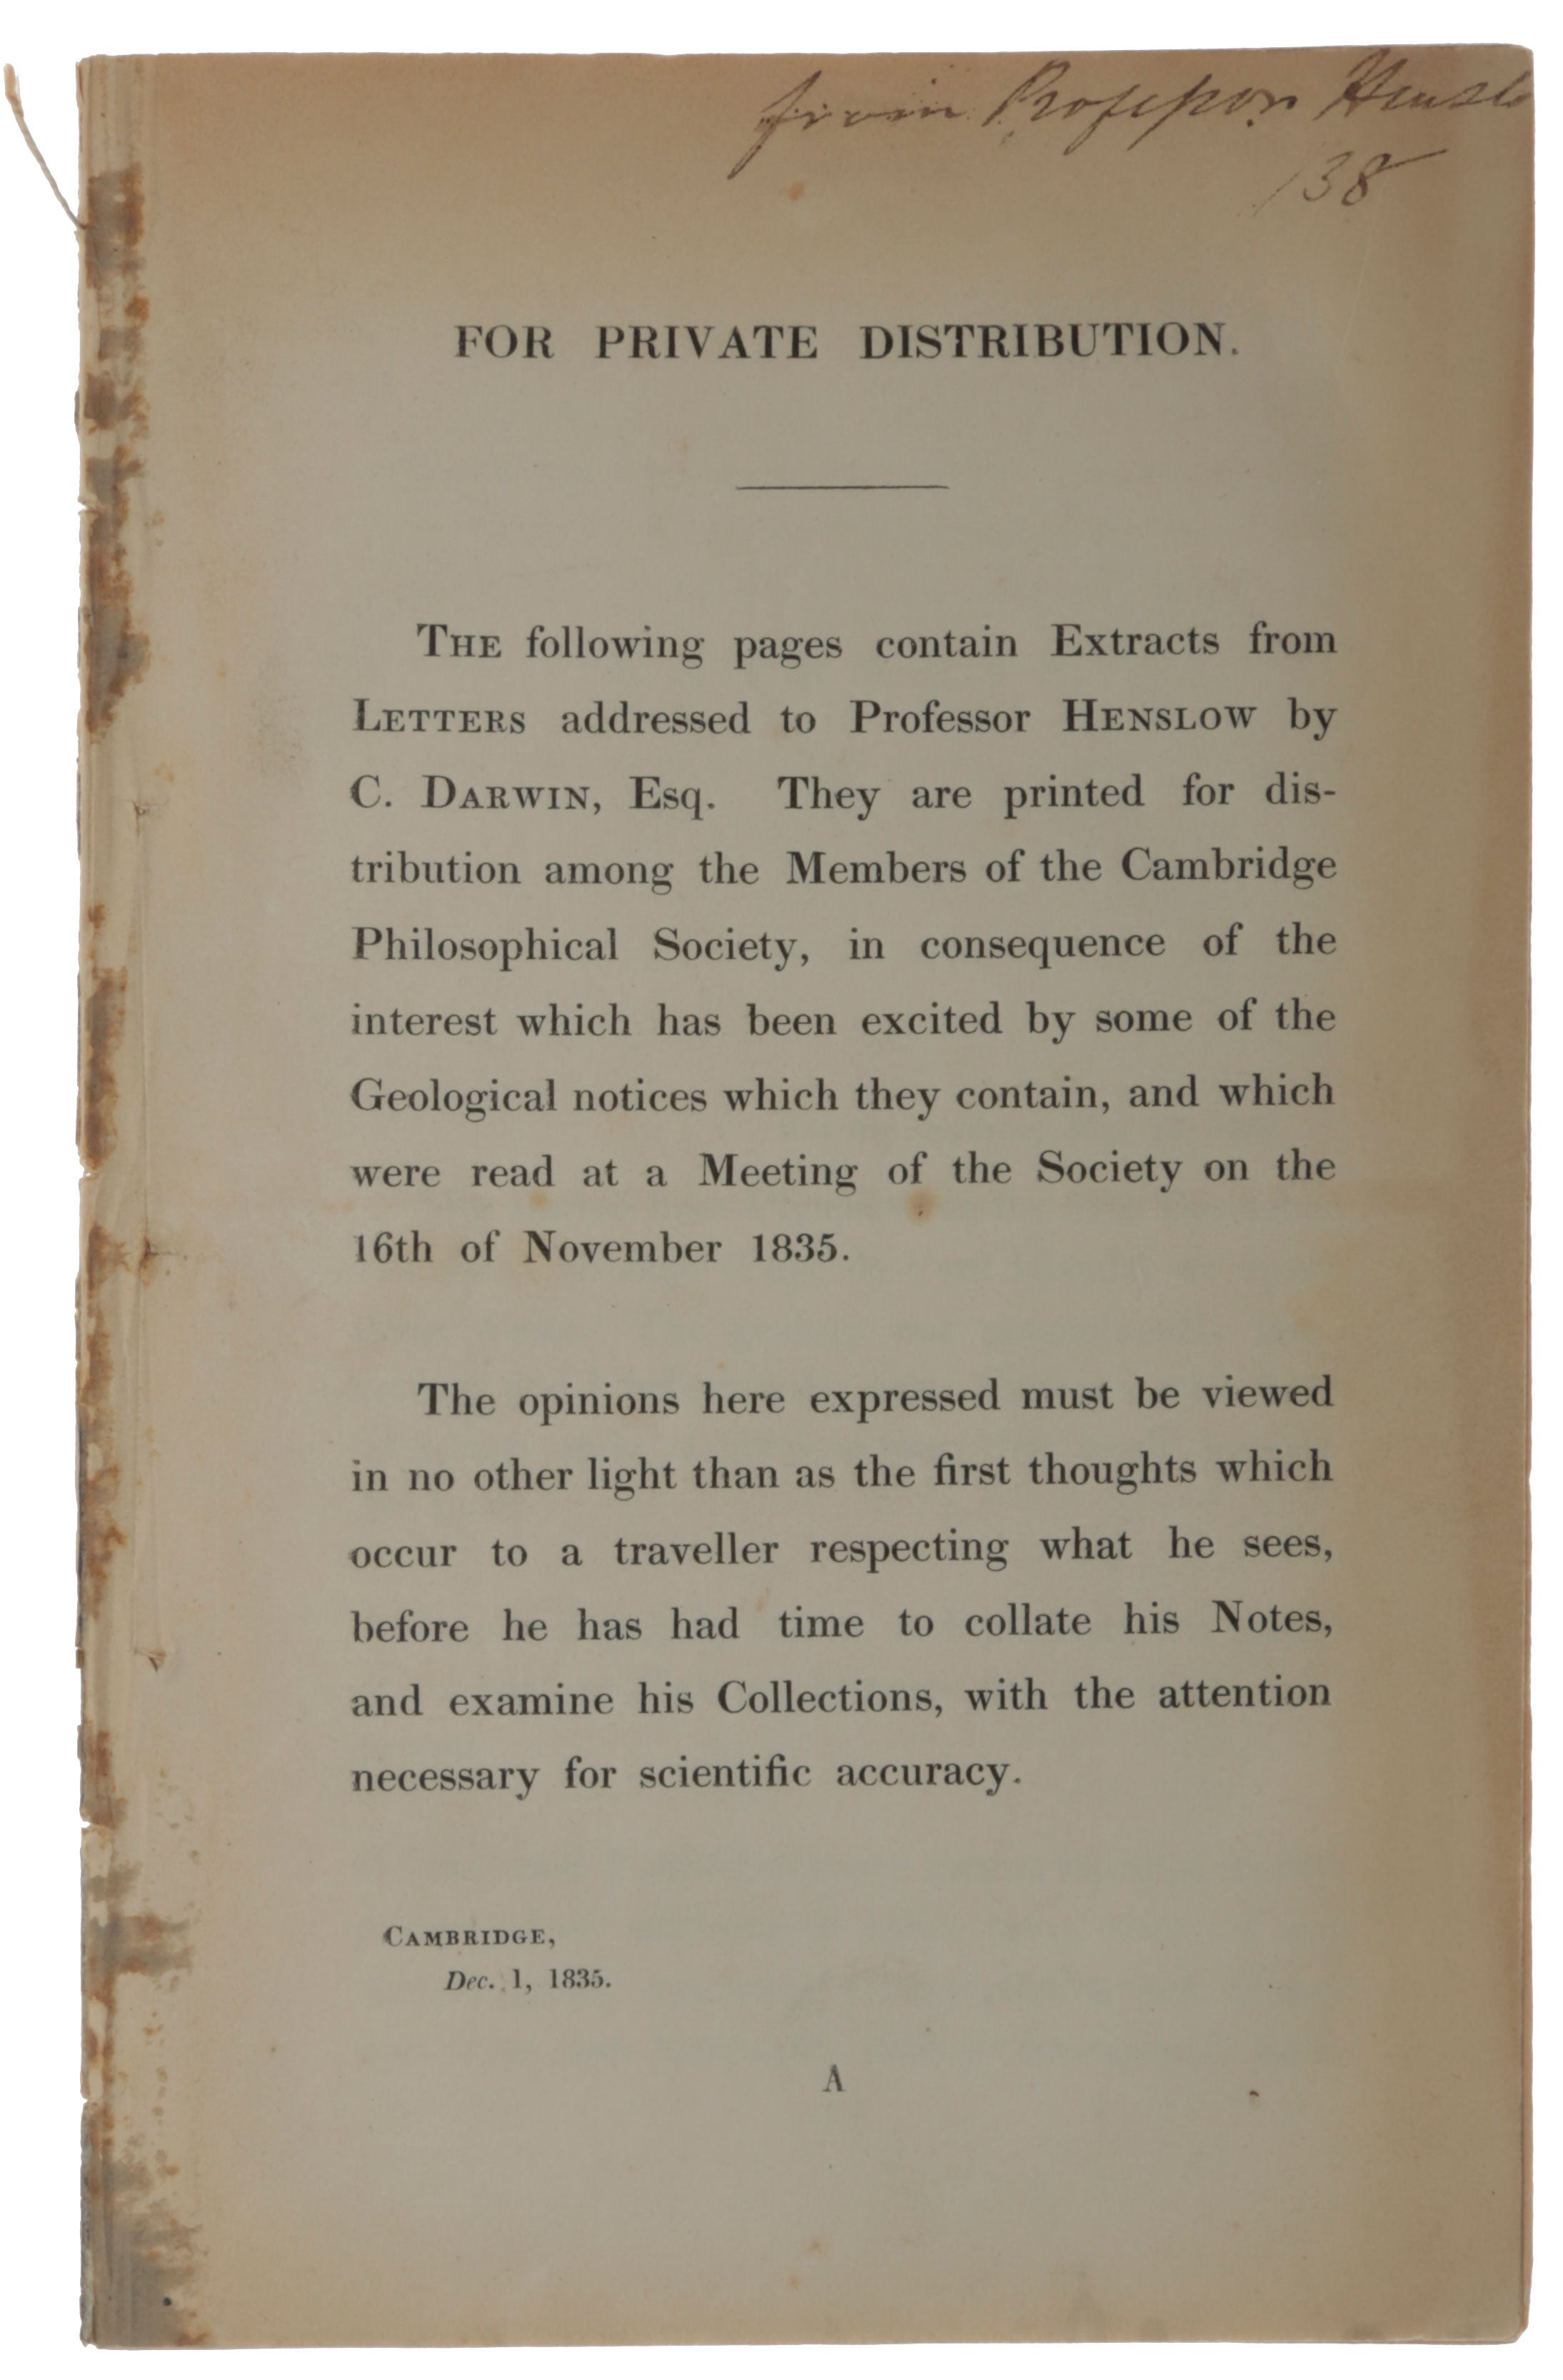 Item #5657 For Private Distribution. The following pages contains extracts from Letters addressed to Professor Henslow by C. Darwin, Esq. They are printed for distribution among the members of the Cambridge Philosophical Society …. Charles DARWIN.